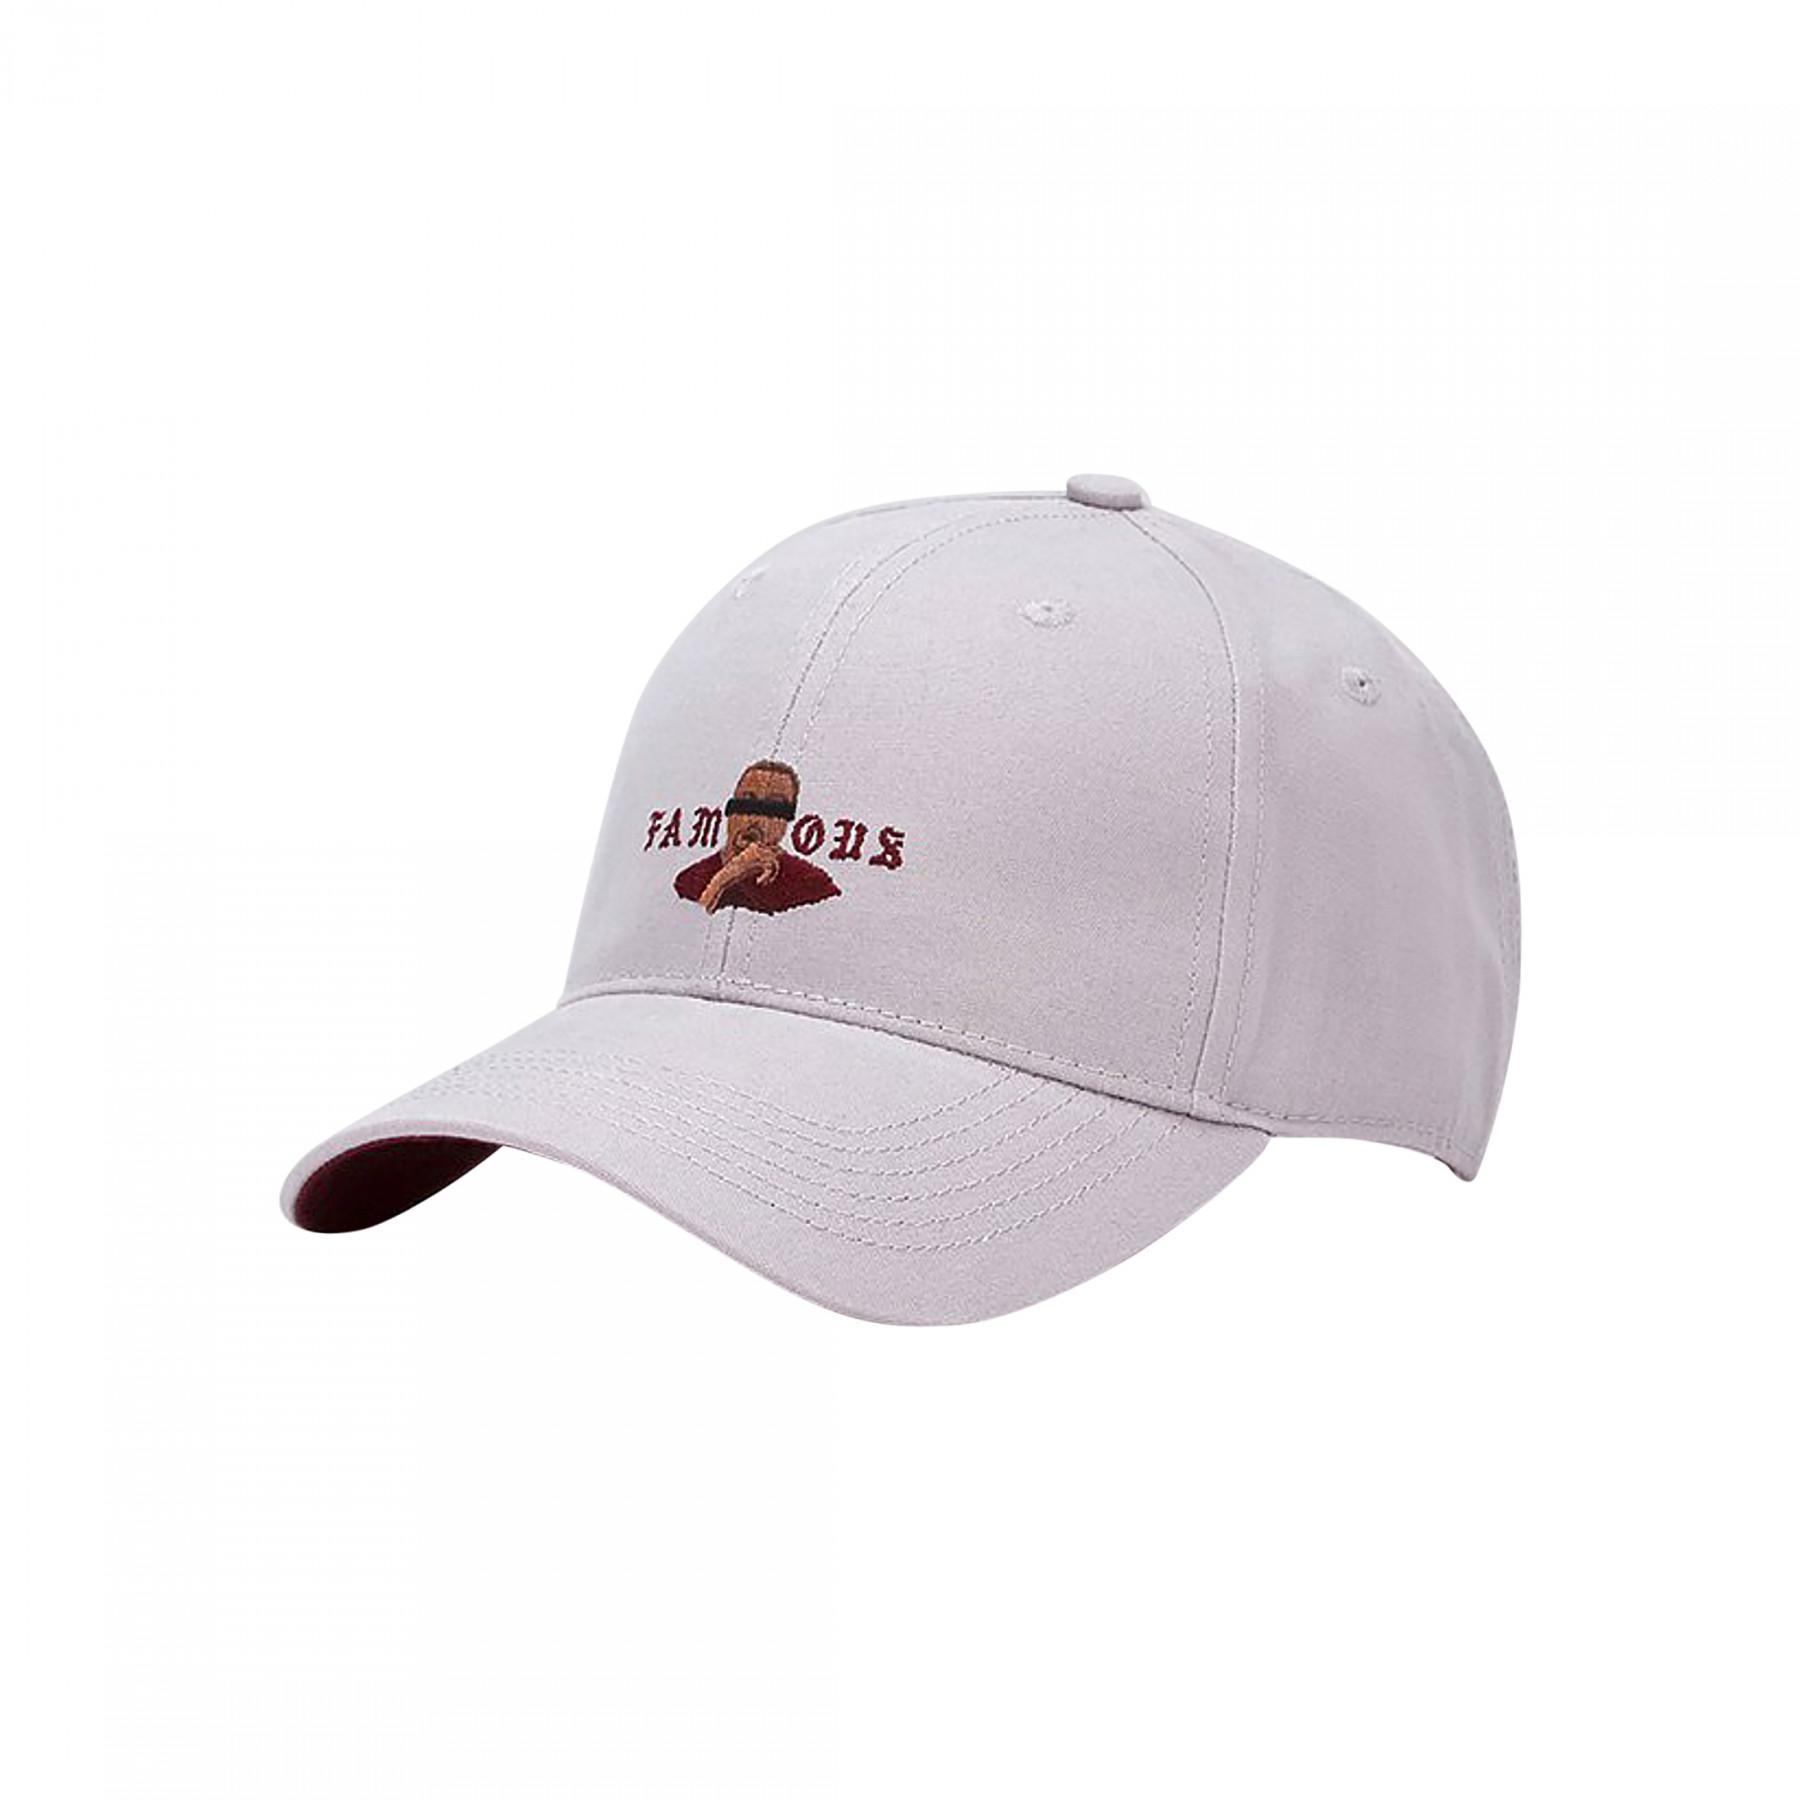 Gorra Cayler & Sons wl drop out curved